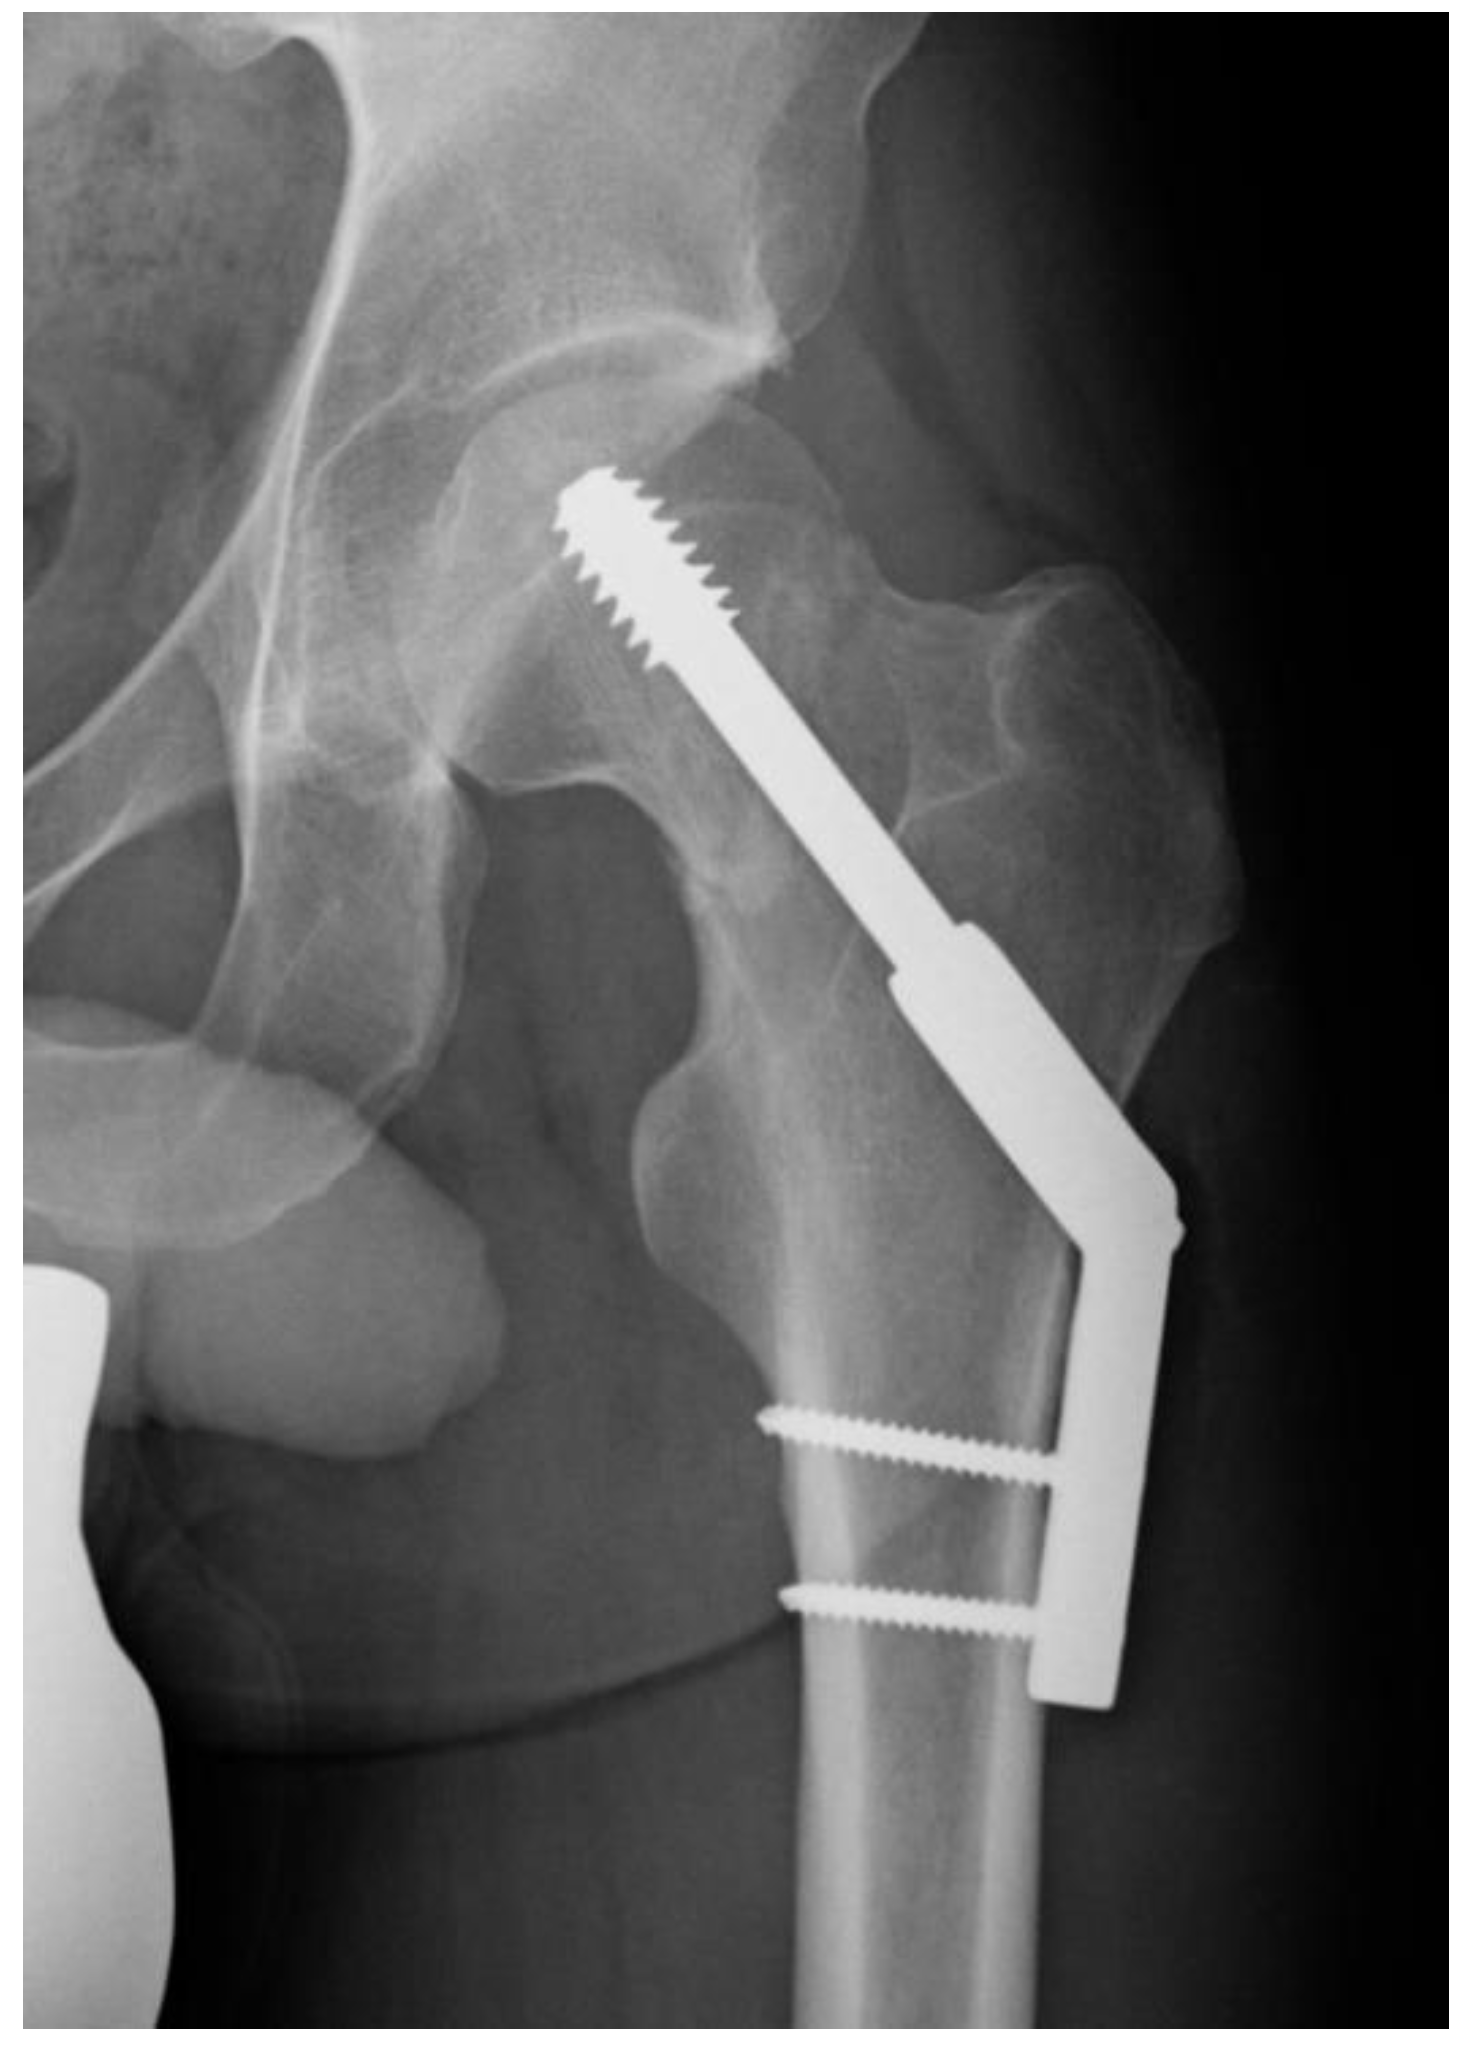 JCM | Free Full-Text | A Comparison of Dynamic Hip Screw and Two Cannulated  Screws in the Treatment of Undisplaced Intracapsular Neck  Fractures—Two-Year Follow-Up of 453 Patients